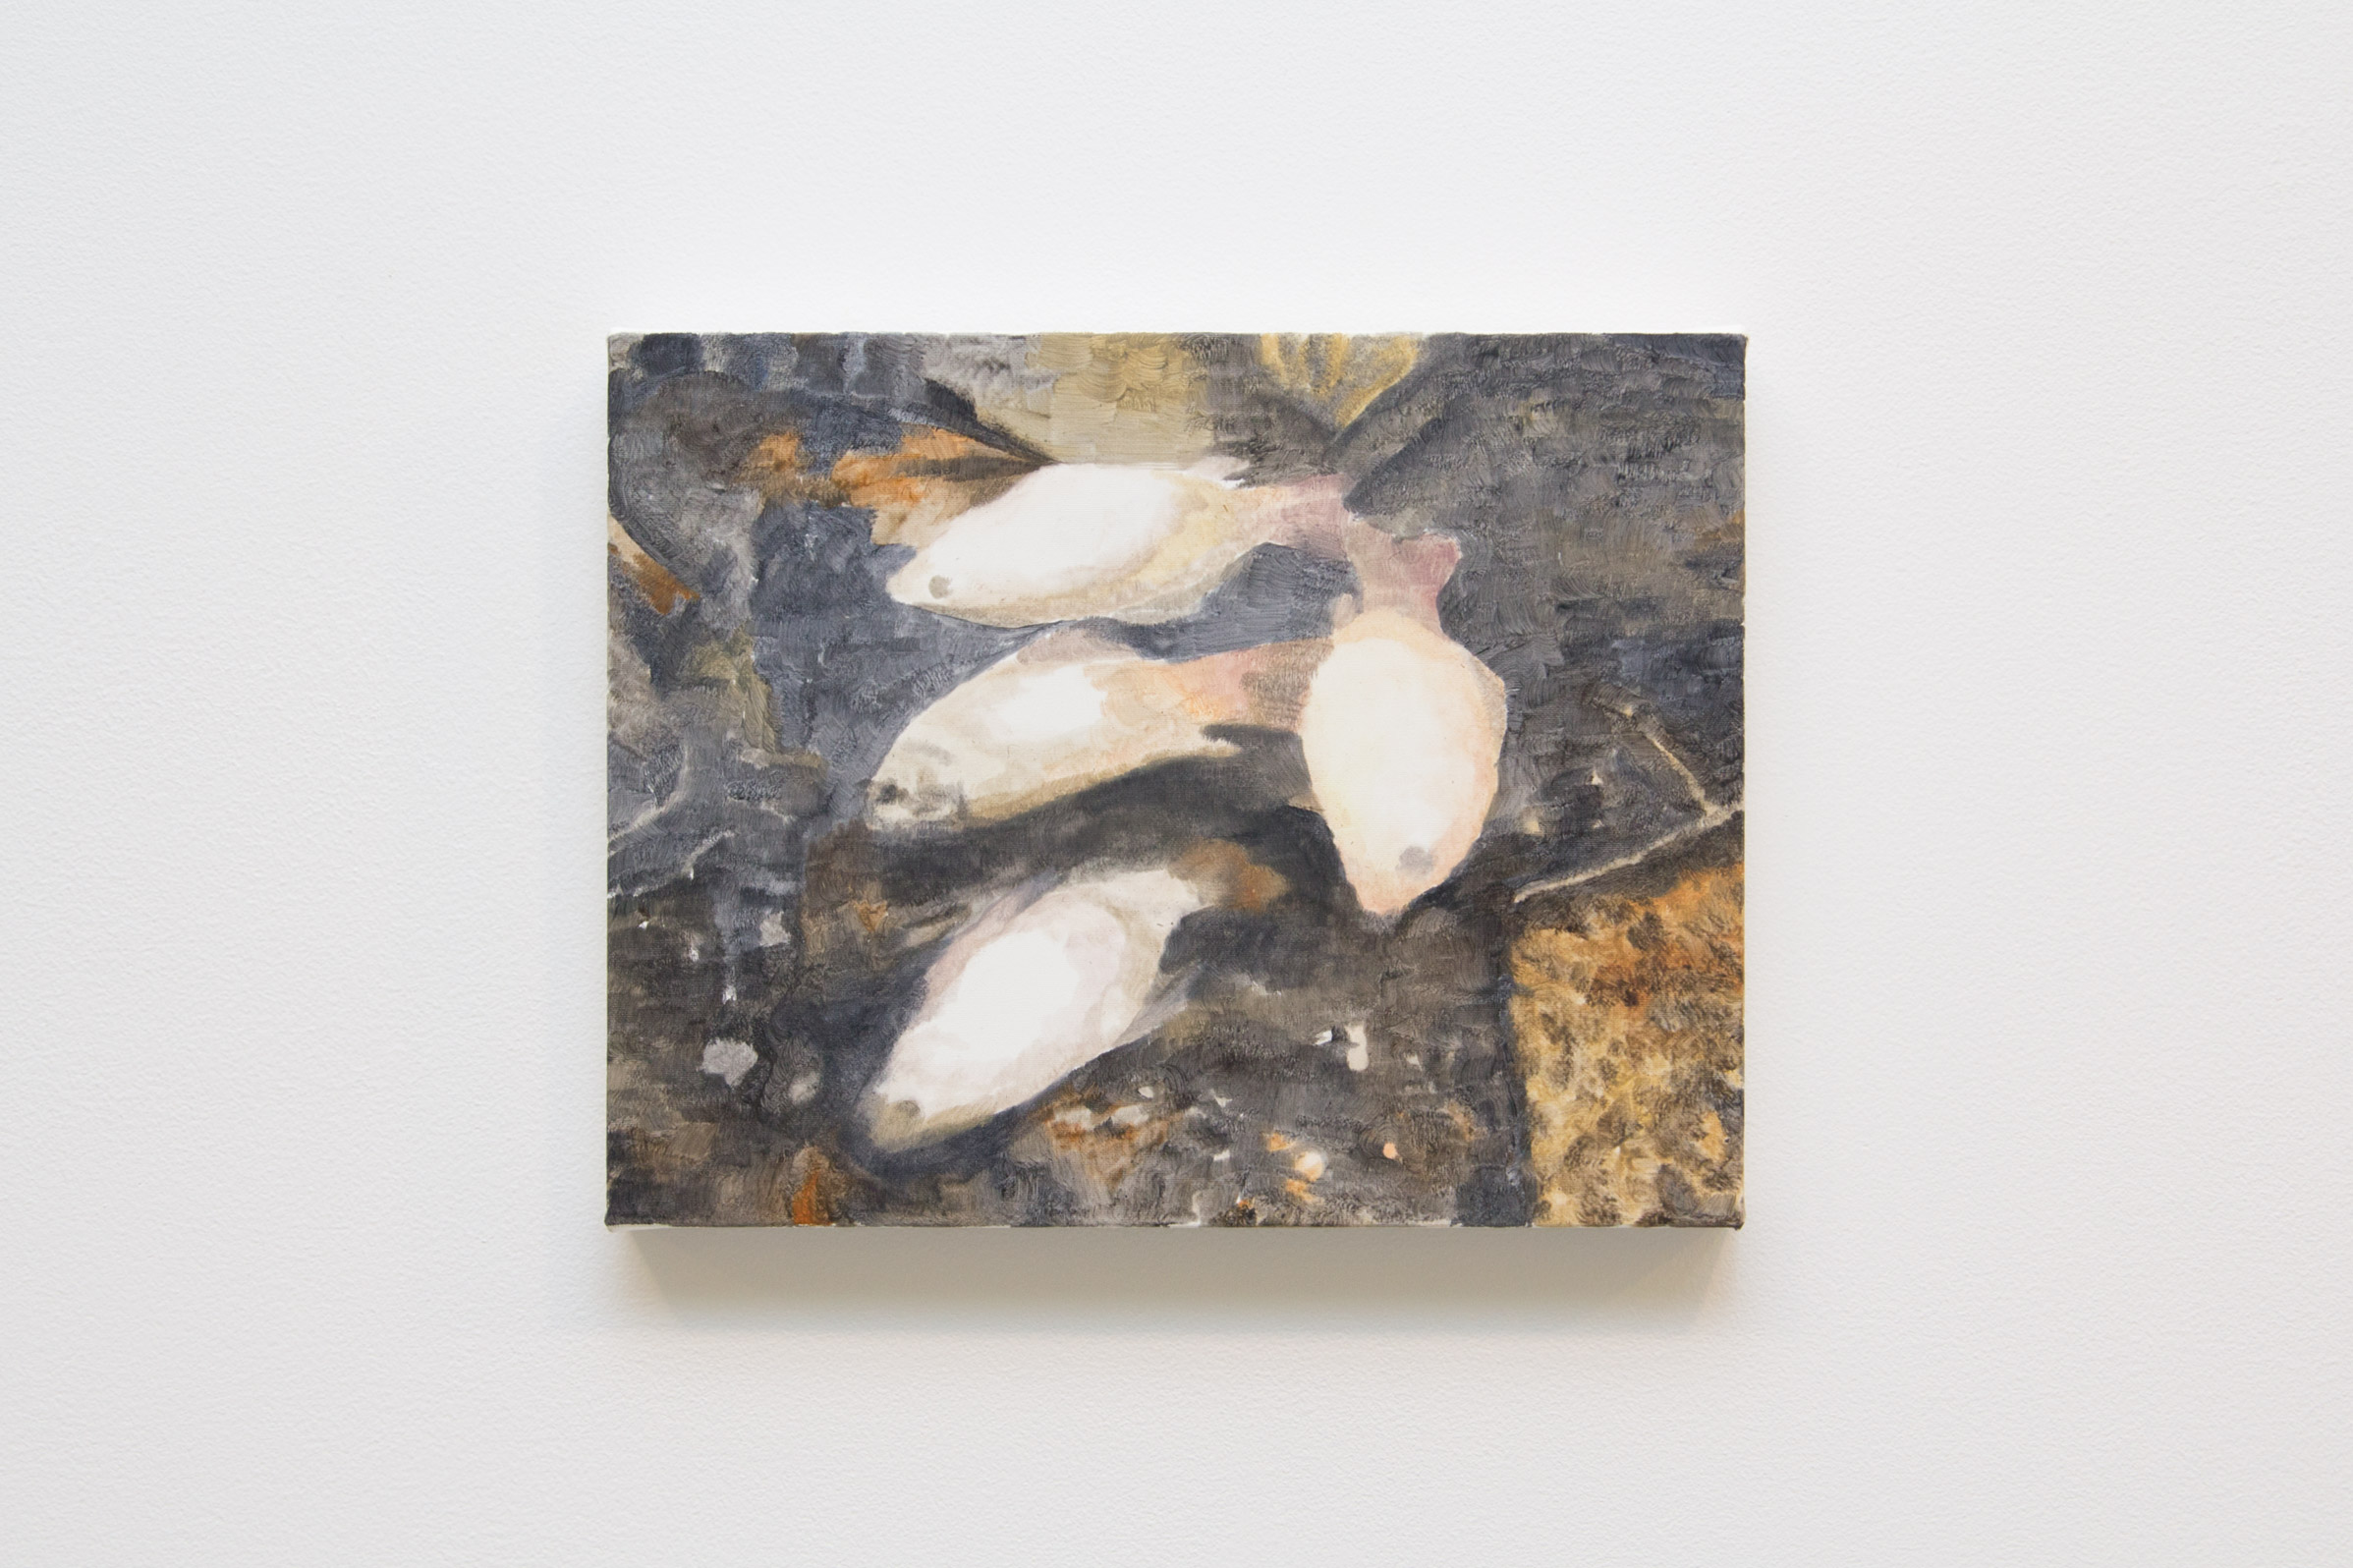 Lucien Smith, Untitled 001 (Dead Fish), 2017, oil on linen, 8h x 10w in.